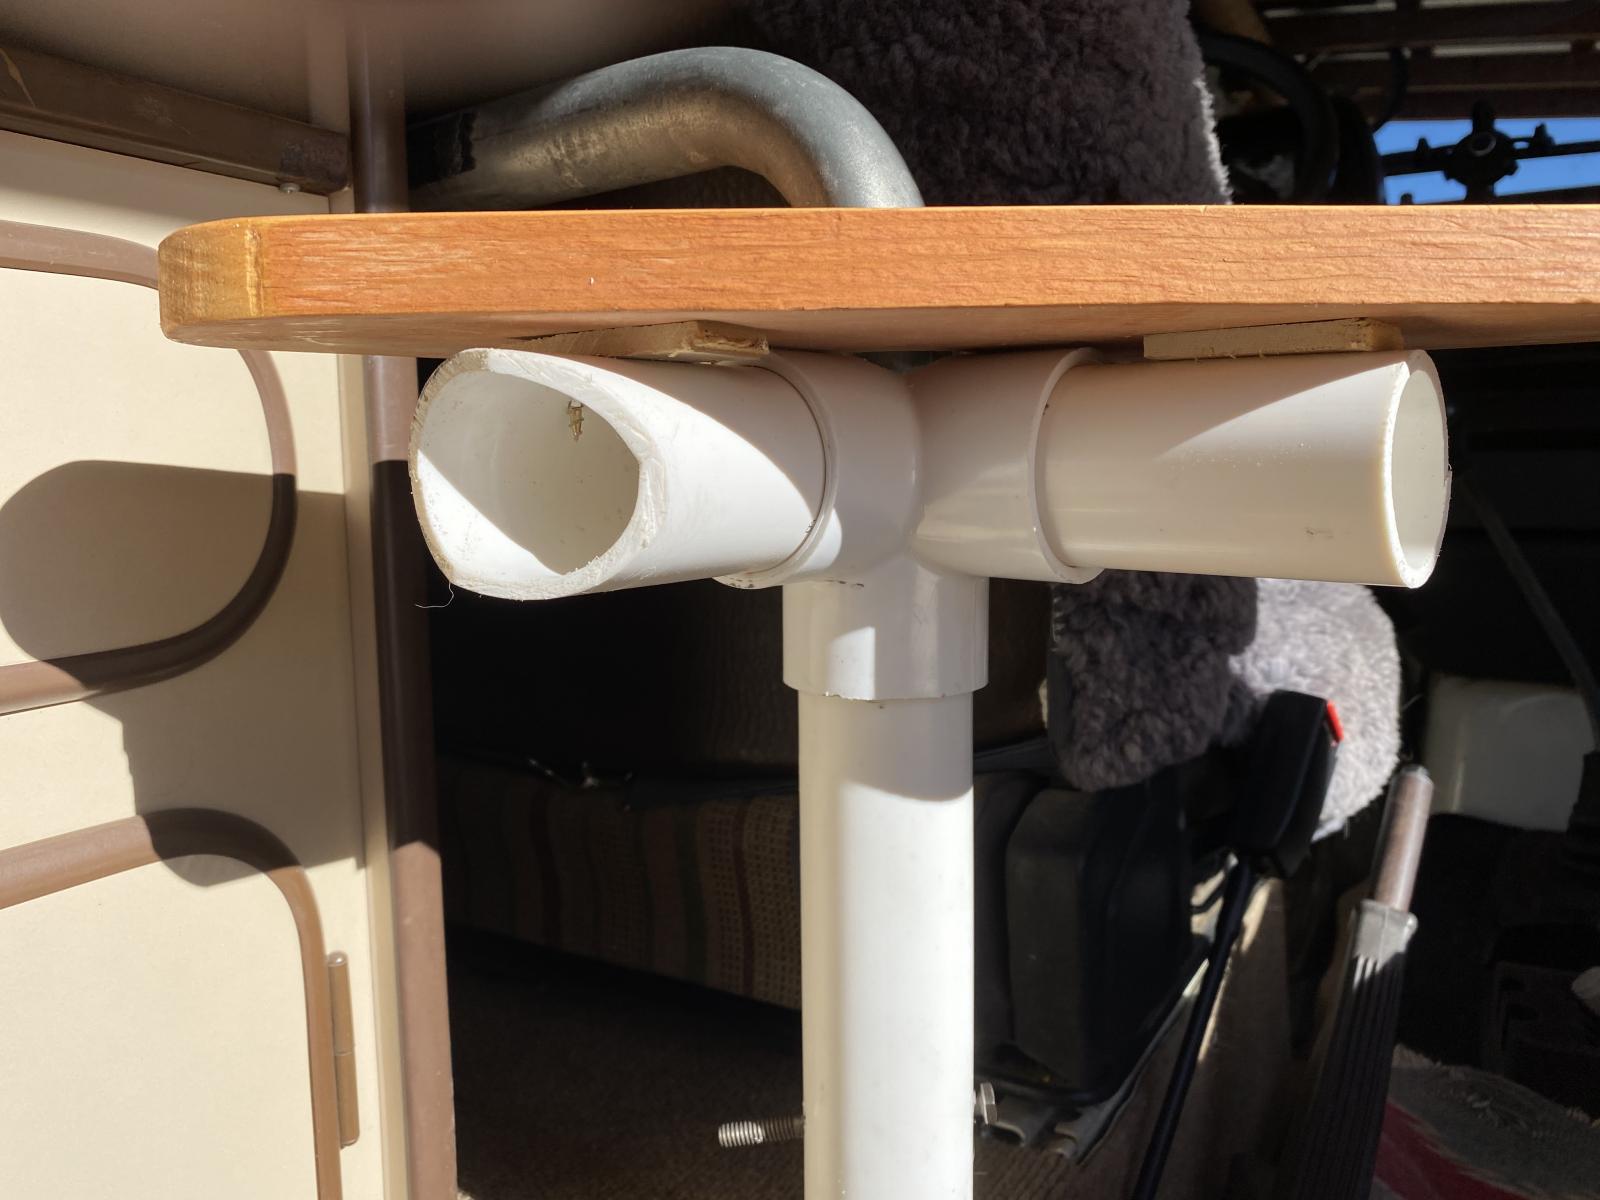  Vanagon - View topic - homemade no weld step to upper bunk